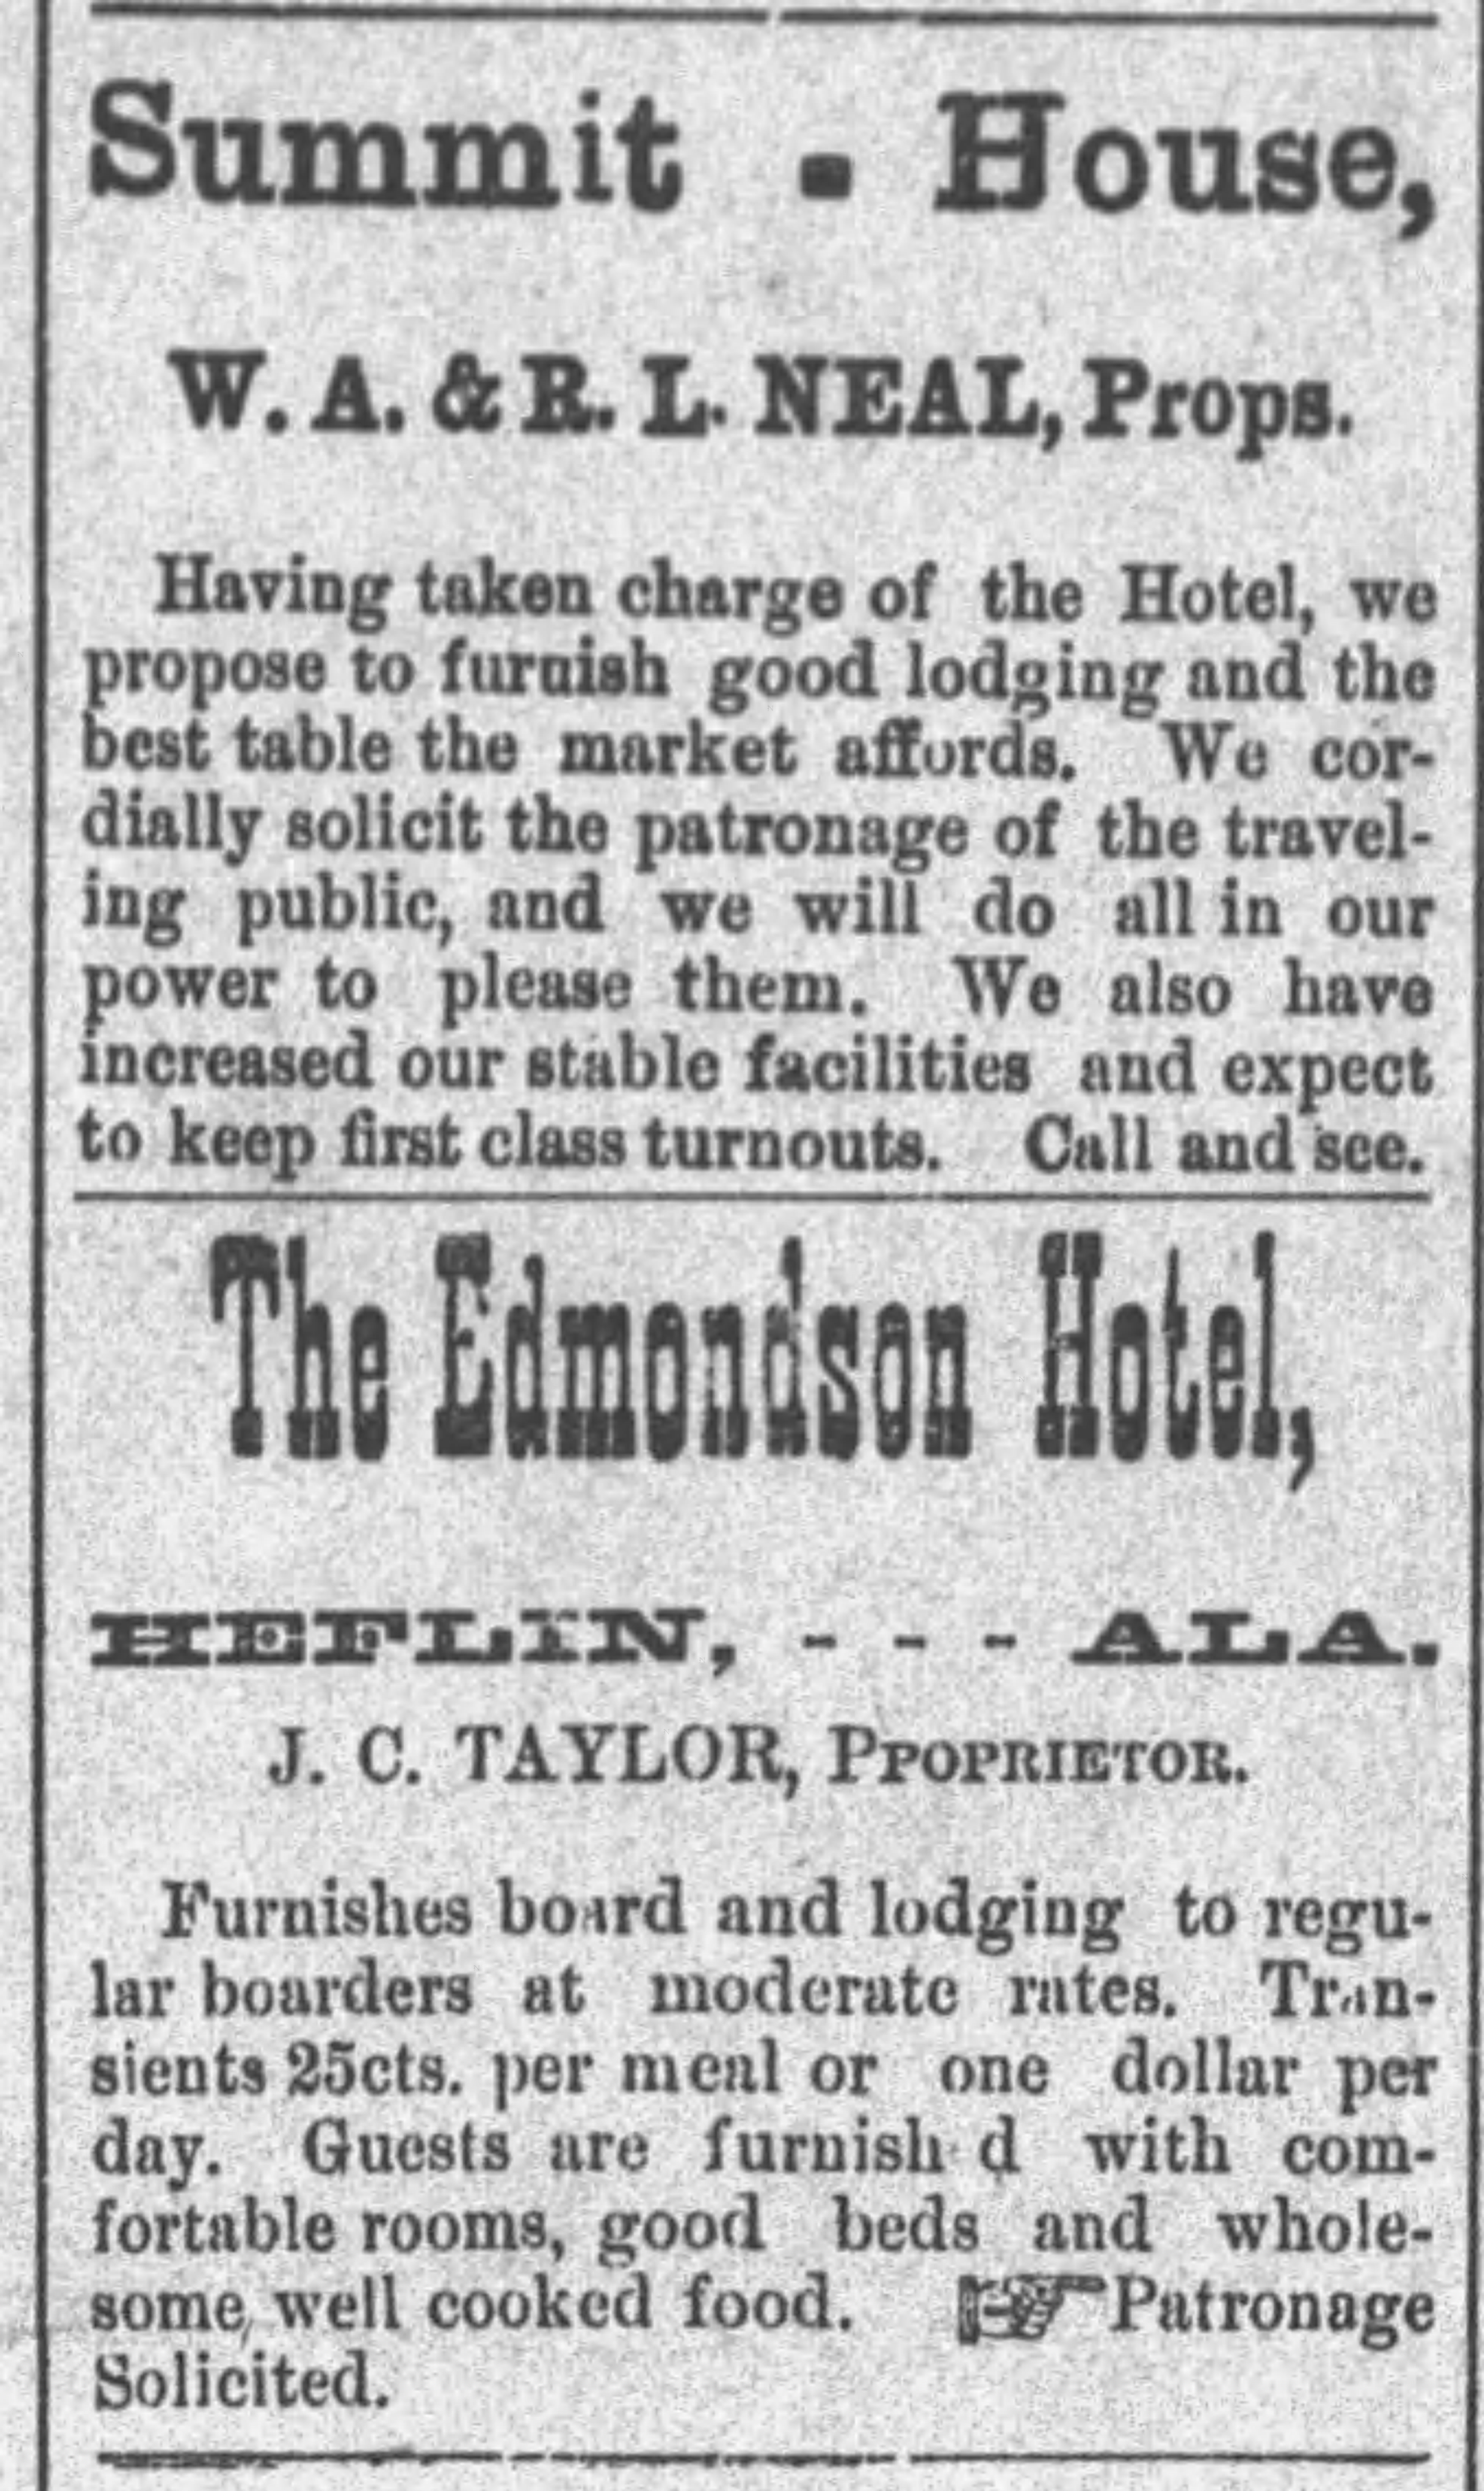 PATRON – Farm for sale in Cleburne and arrivals at Summit House hotel in March, 1891